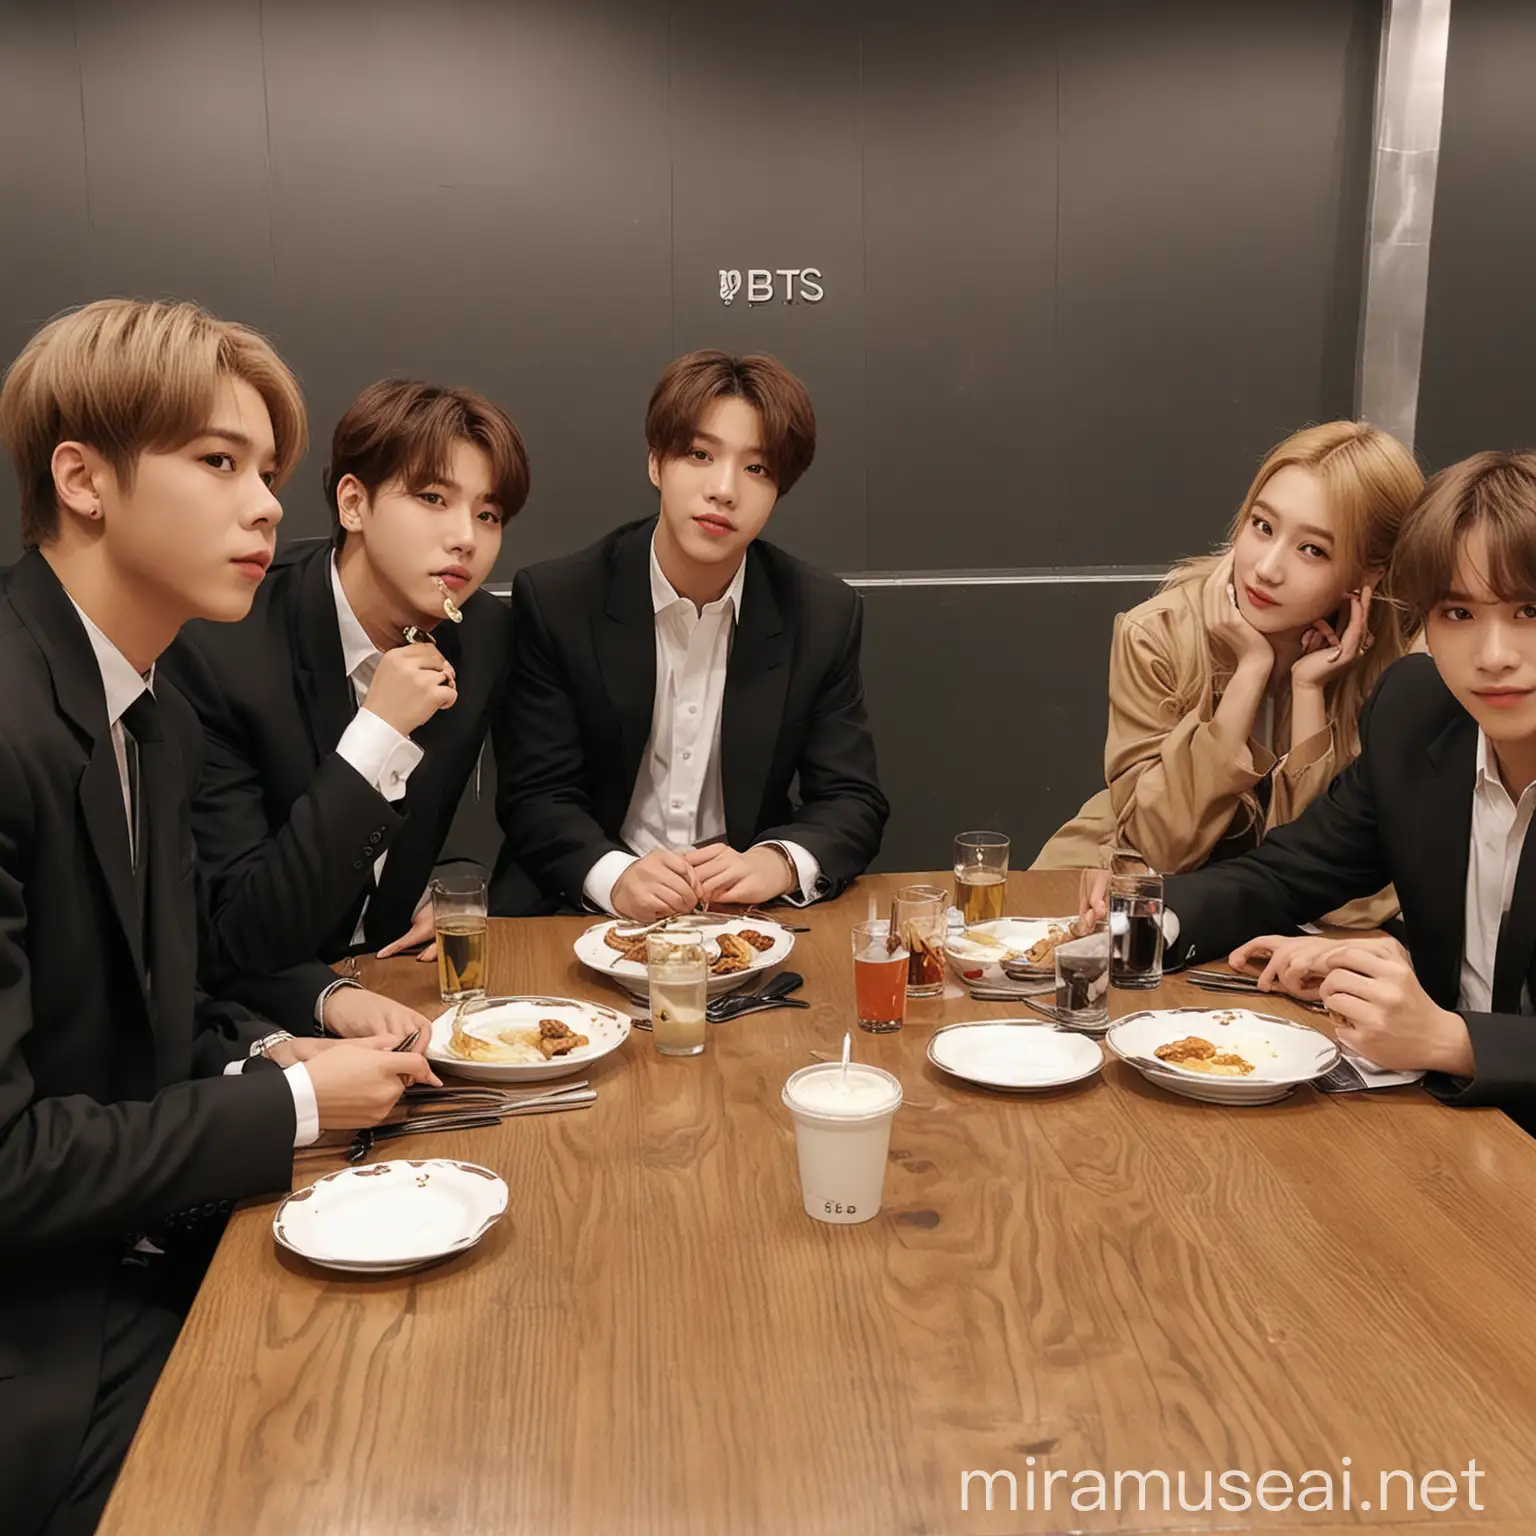 BTS Date with a Romantic Dinner Setup